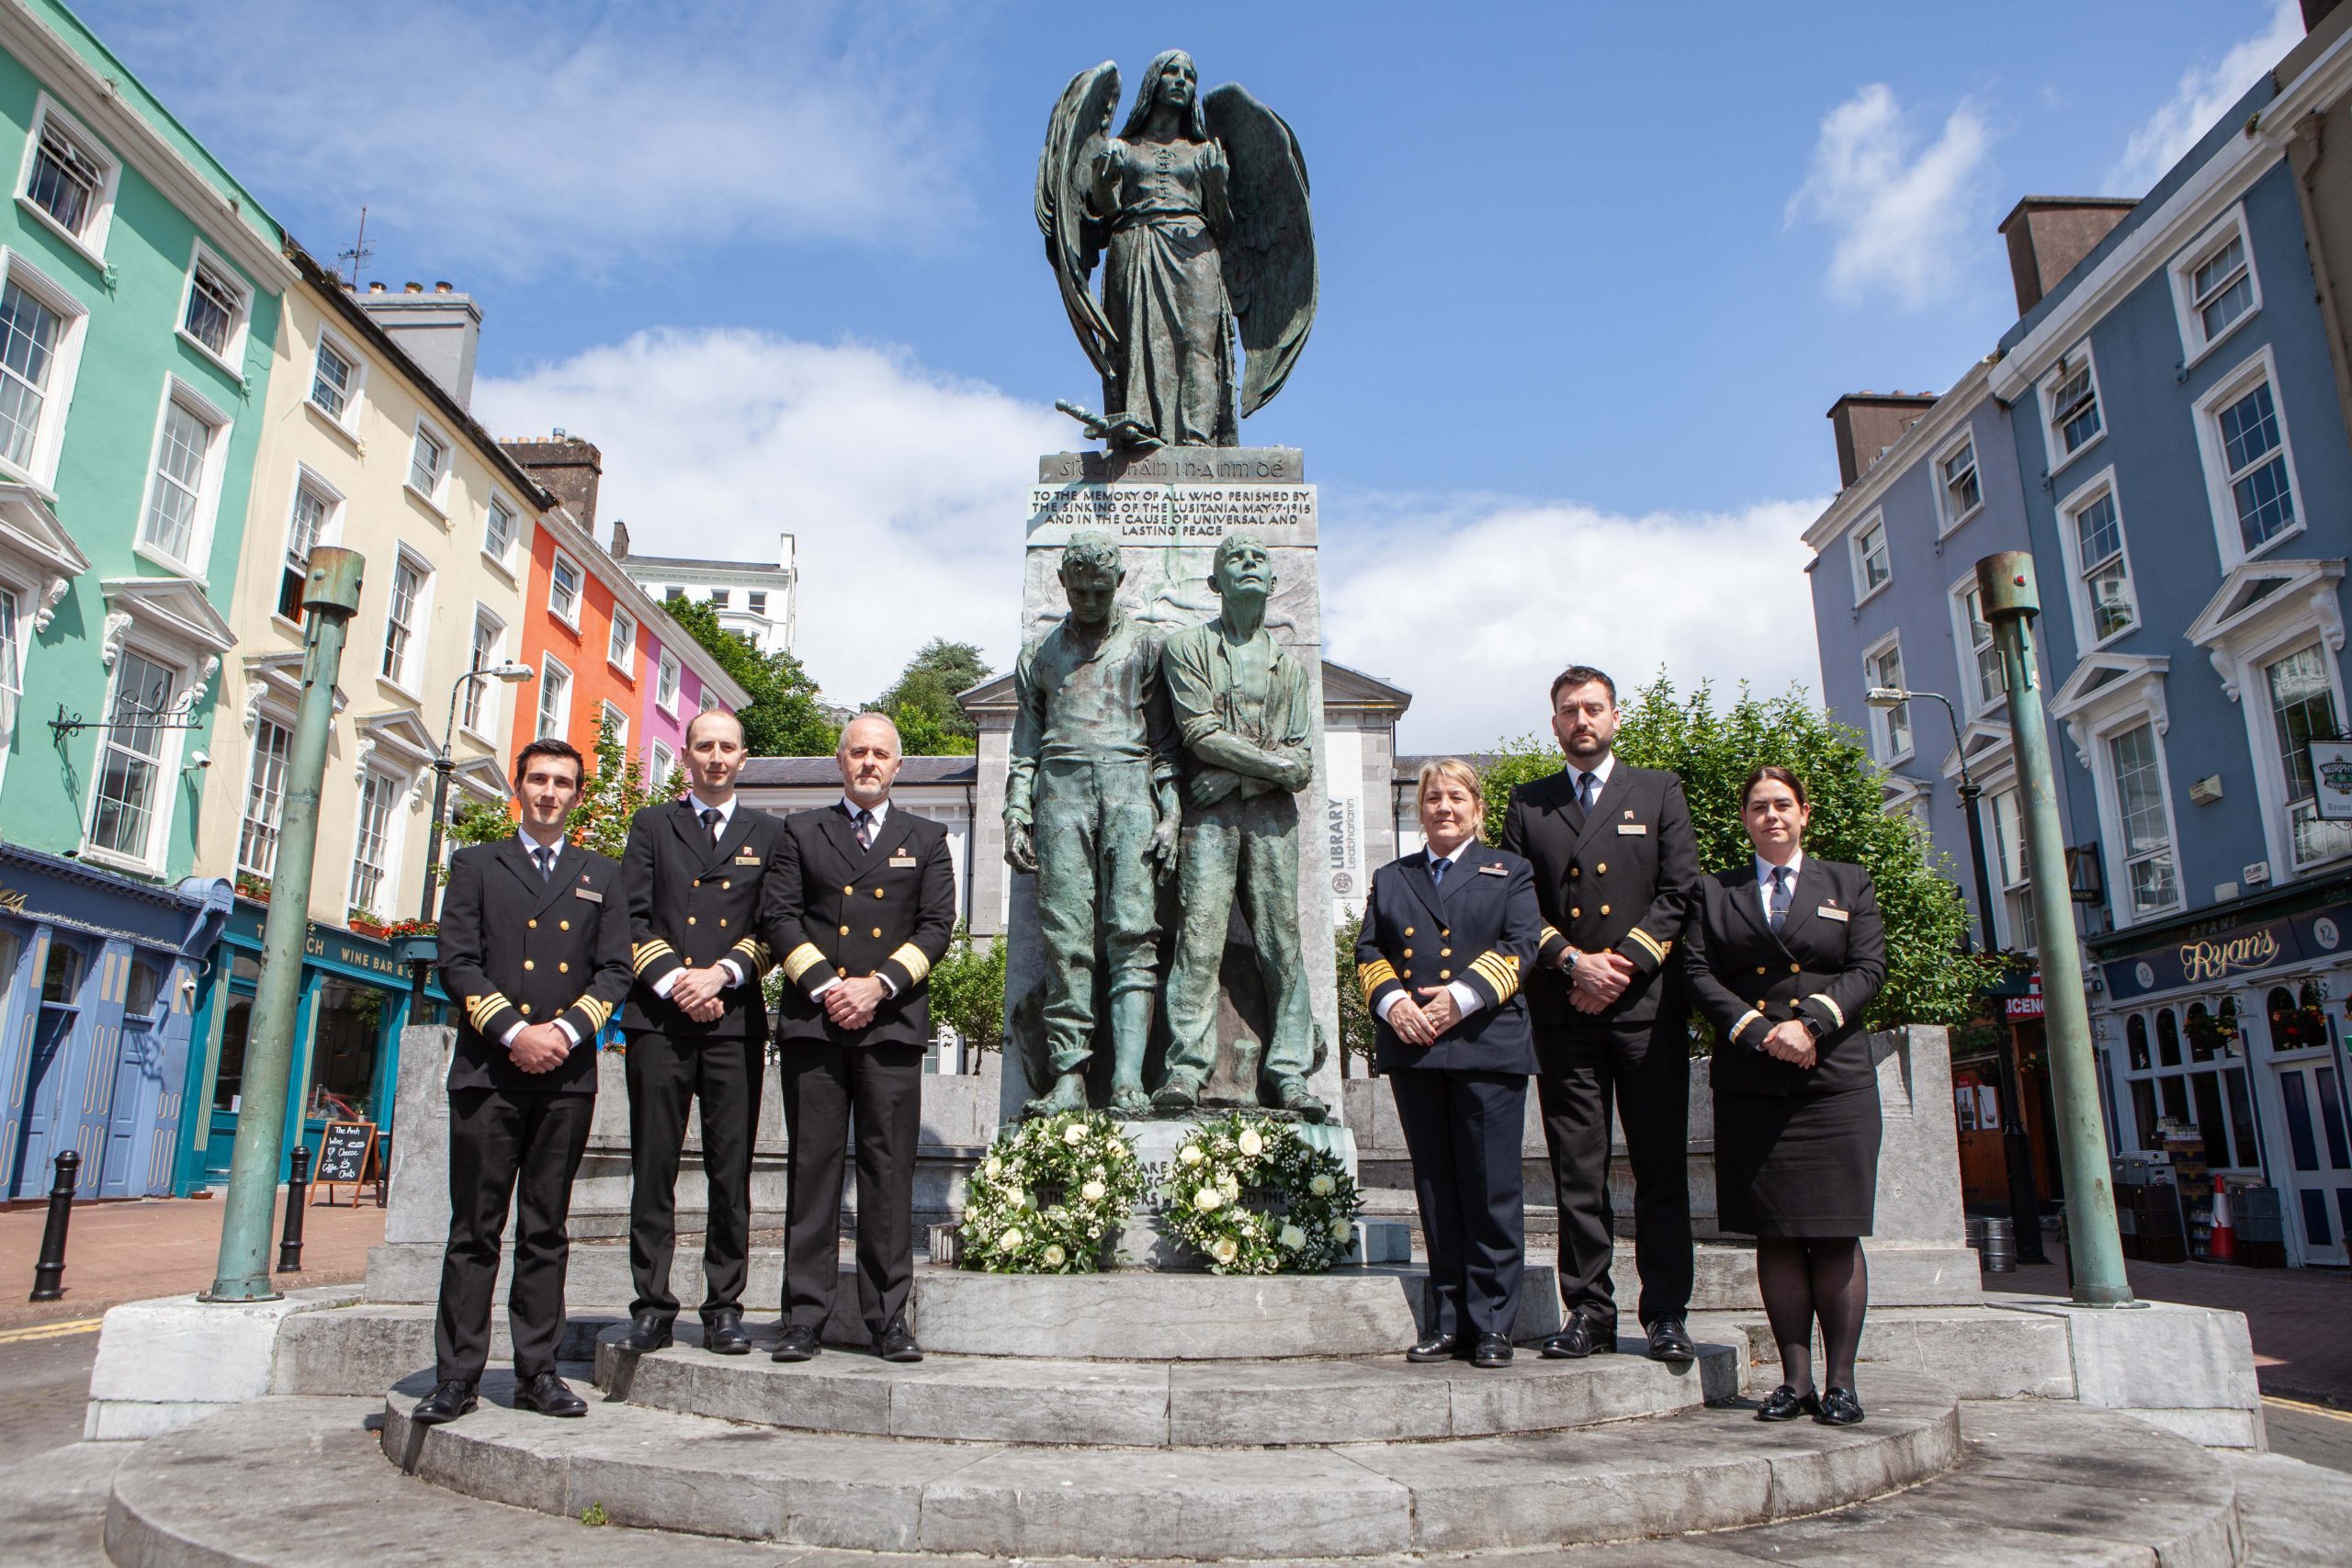 Port of Cork Company Welcomes Queen Anne on Maiden Voyage to Cobh - A commemoration wreath was placed at the Lusitania Memorial in Cobh to honour the memory of those lost in the tragic sinking of the Lusitania in 1915 (Image at LateCruiseNews.com - May 2024)